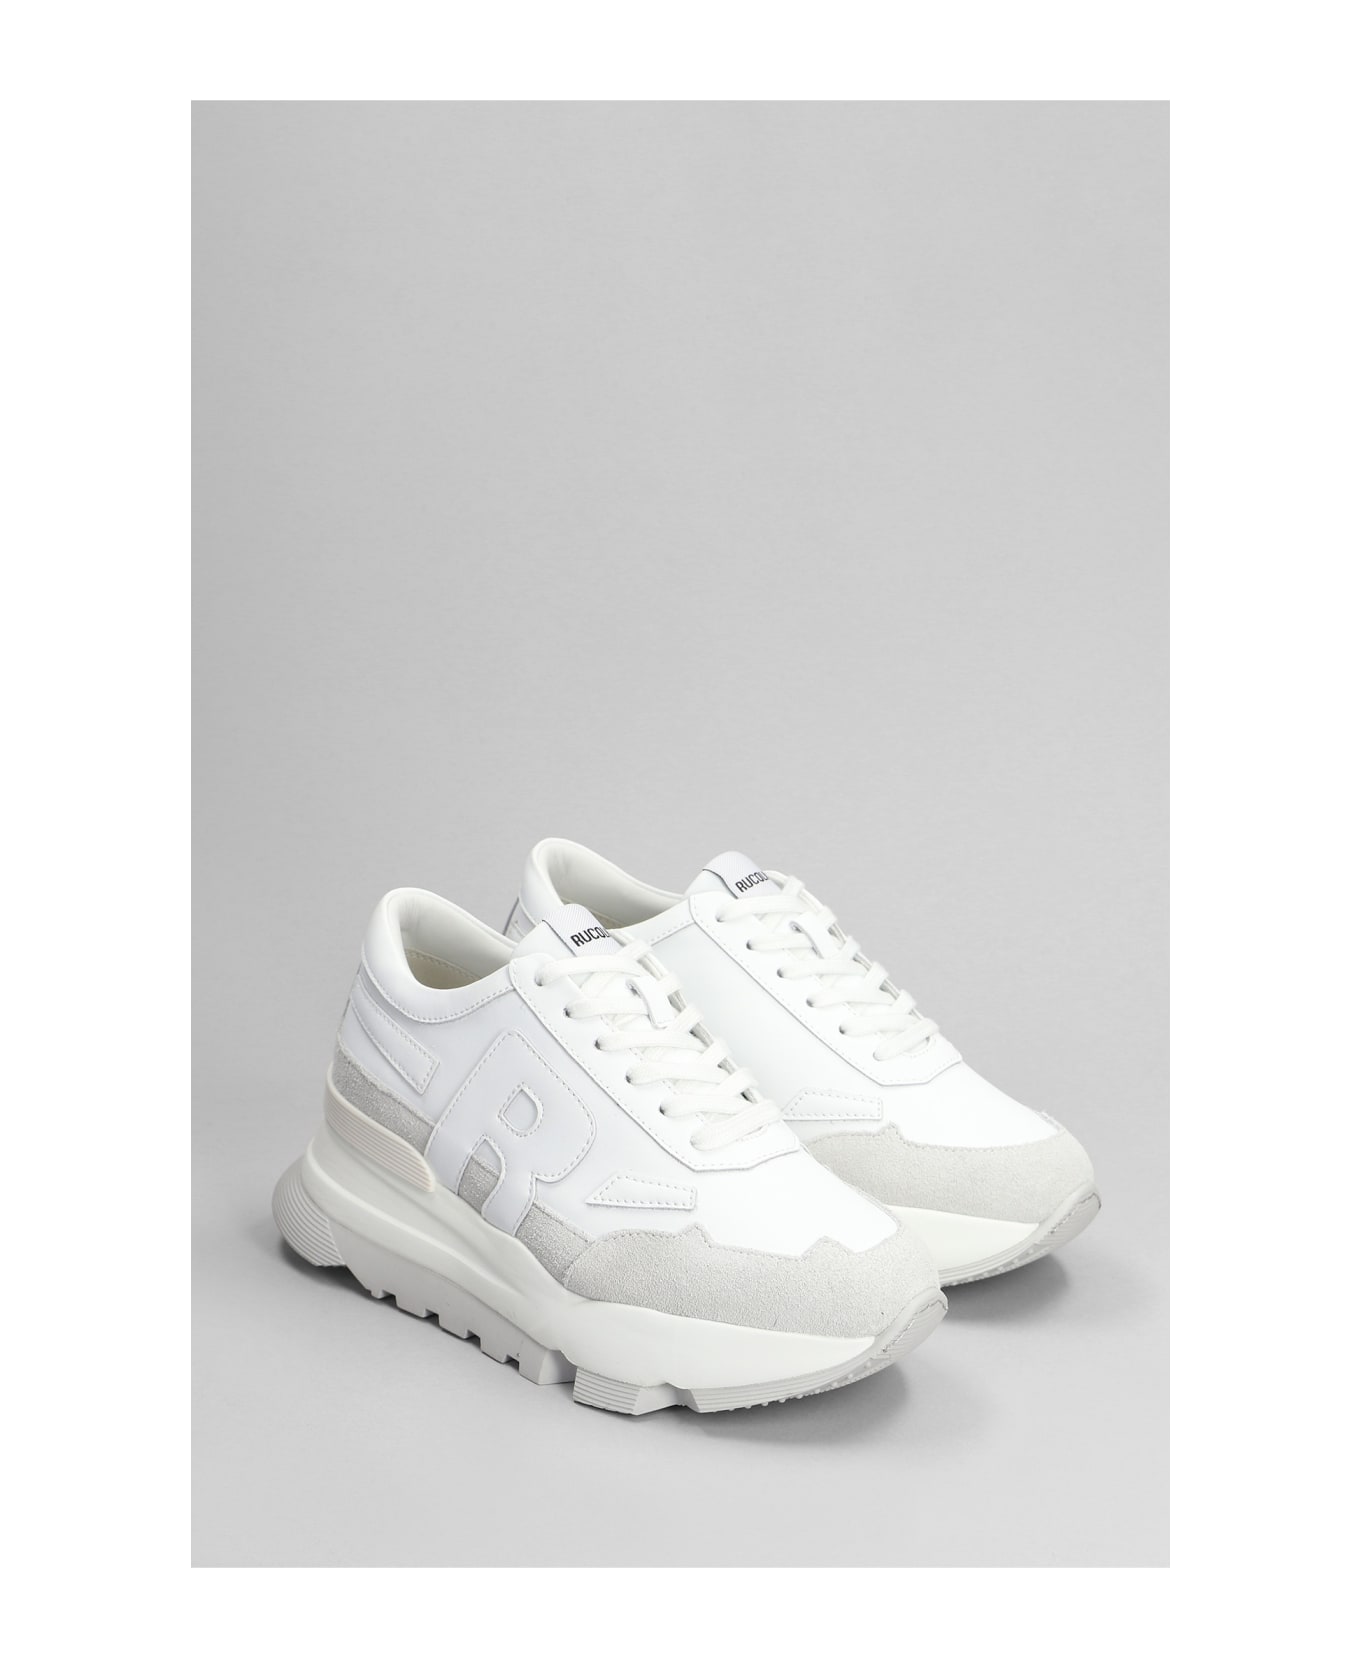 Ruco Line Aki Sneakers In White Suede And Leather - white スニーカー